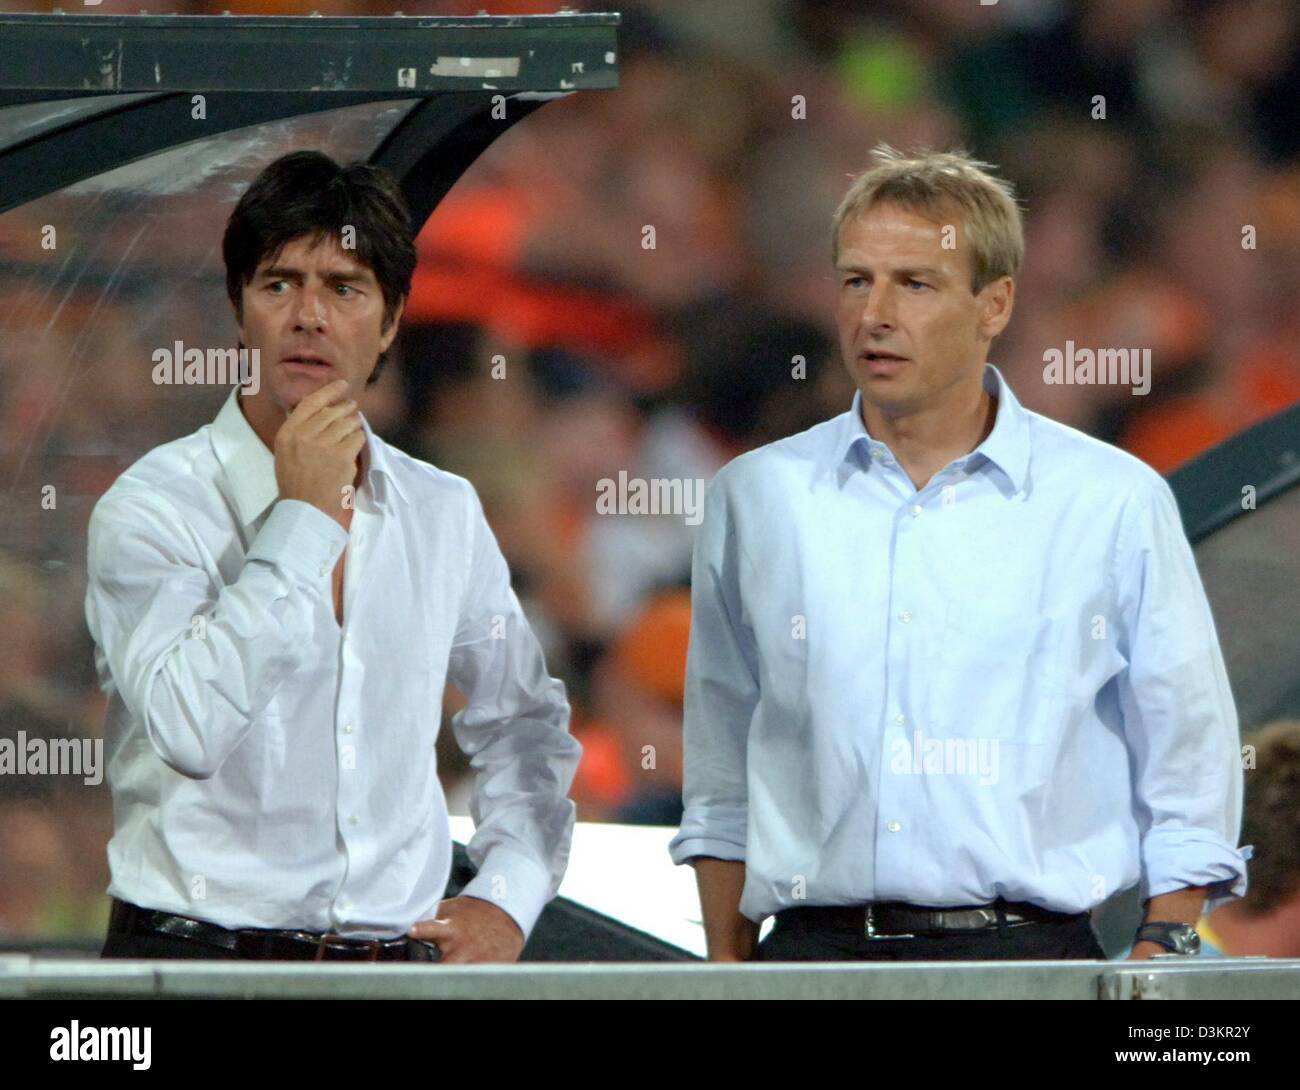 (dpa) - The picture shows head coach of the German national soccer team Juergen Klinsmann (R) and his assistant Joachim Loew during the friendly match Netherlands vs Germany at the 'De Kuip' stadium in Rotterdam, Netherlands, 17 August 2005. The game ended in a 2-2 draw. Photo: Bernd Weissbrod Stock Photo